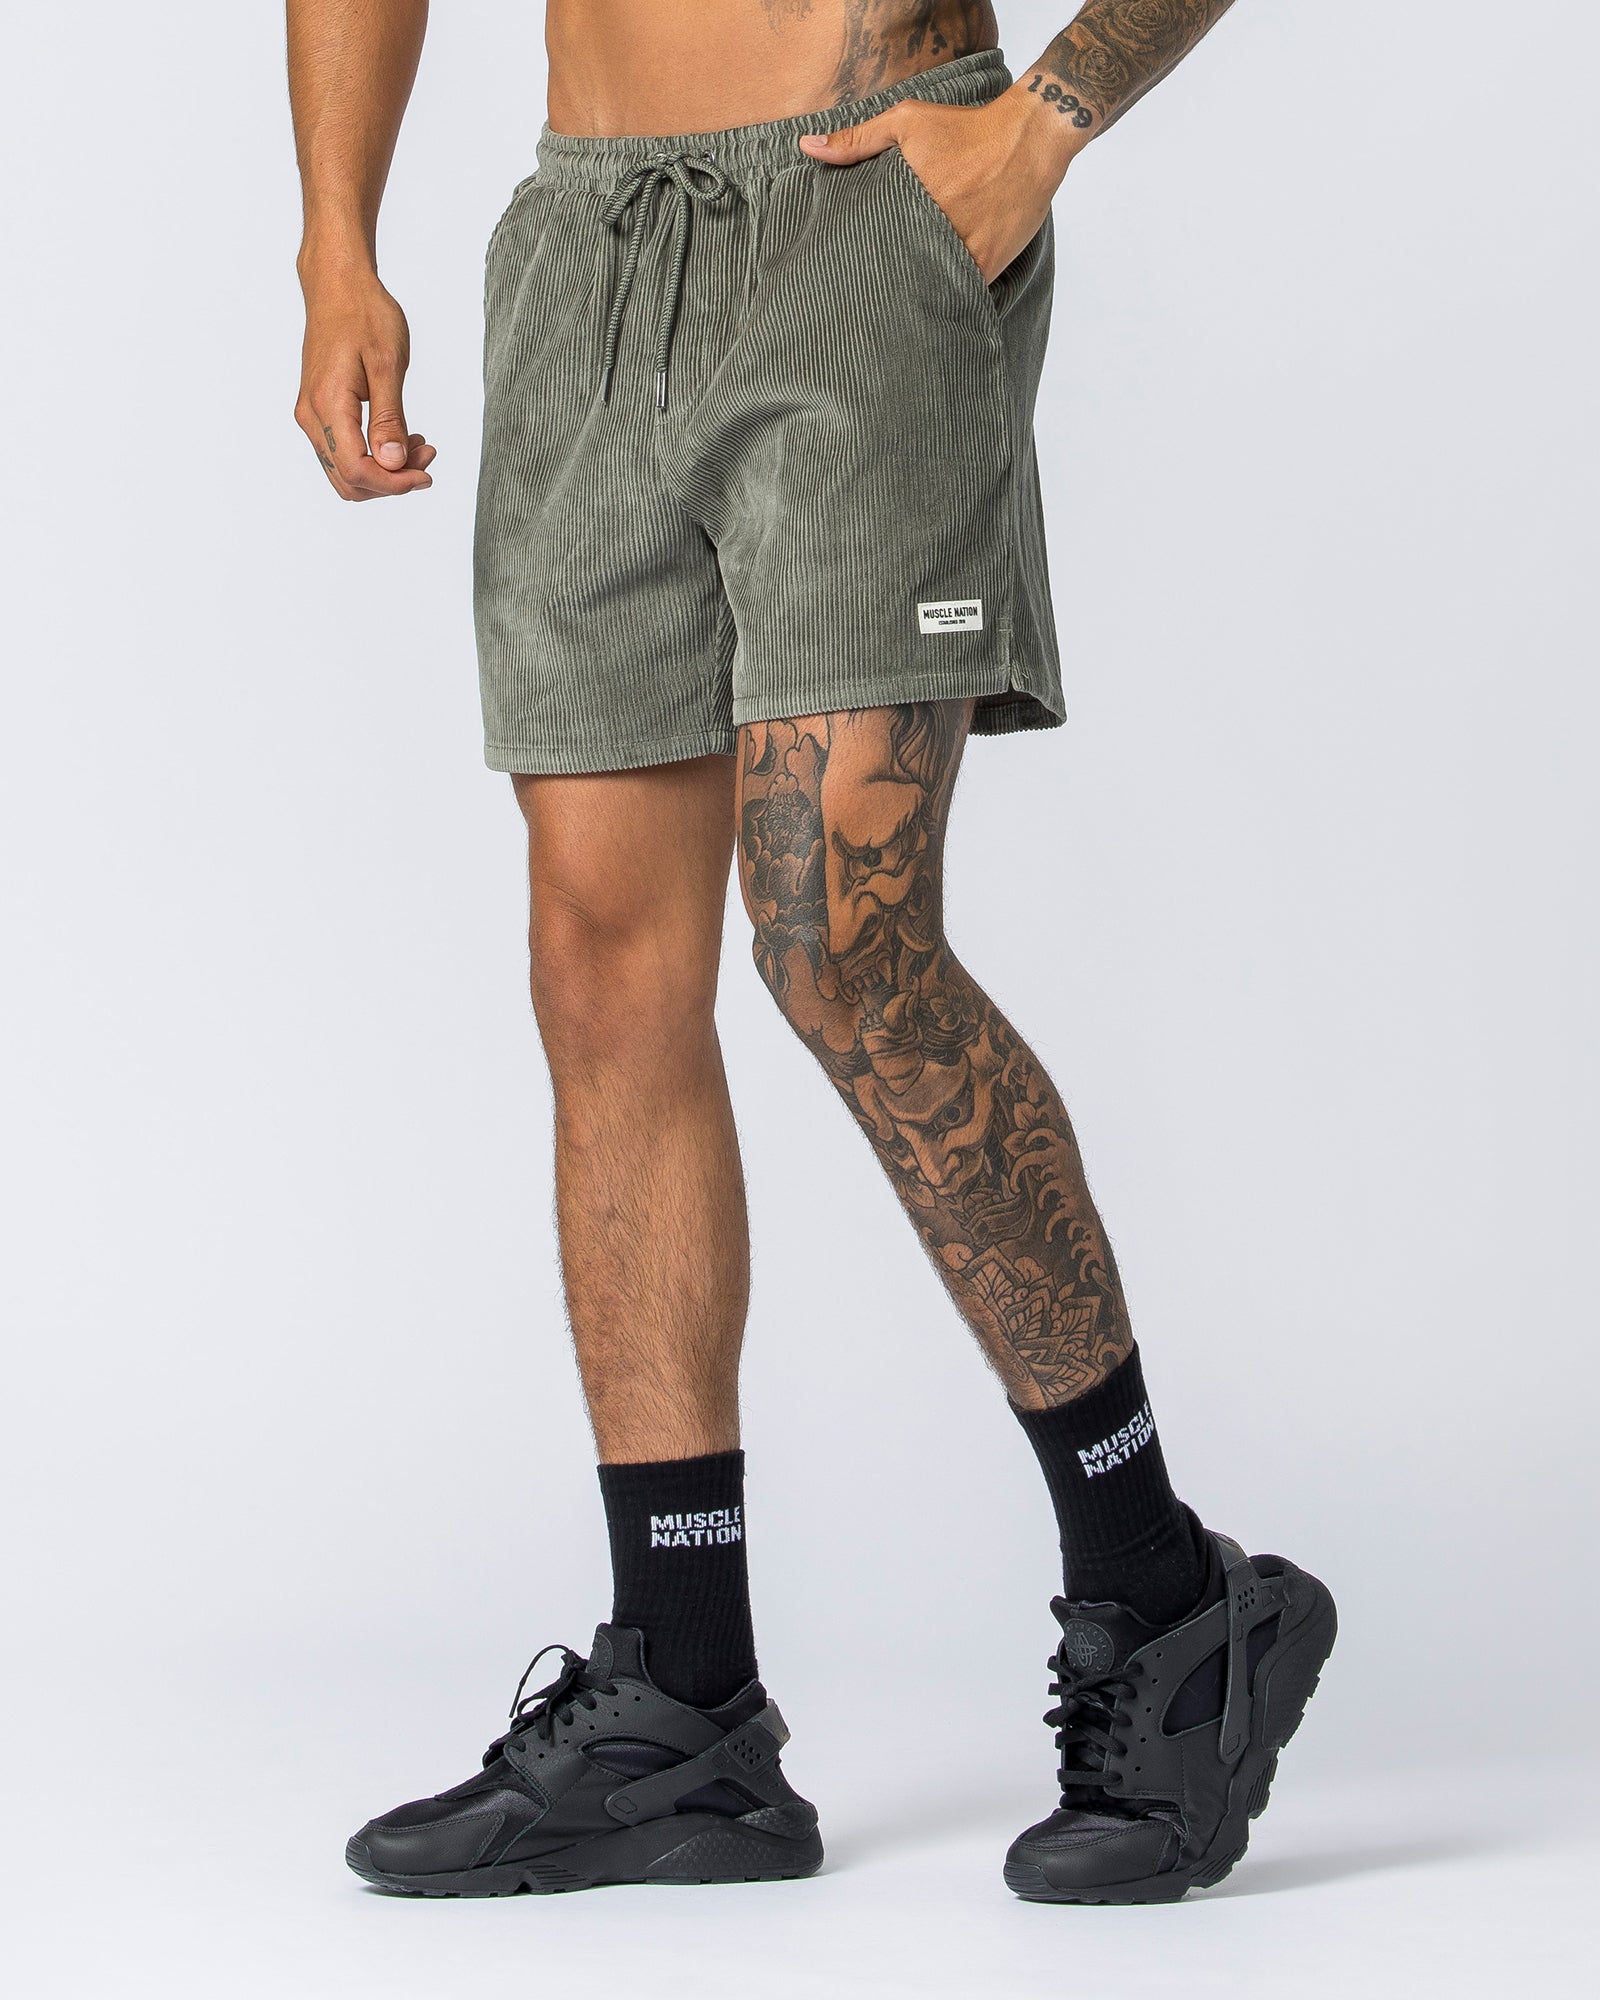 Daily Corduroy Shorts - Light Sage - Muscle Nation